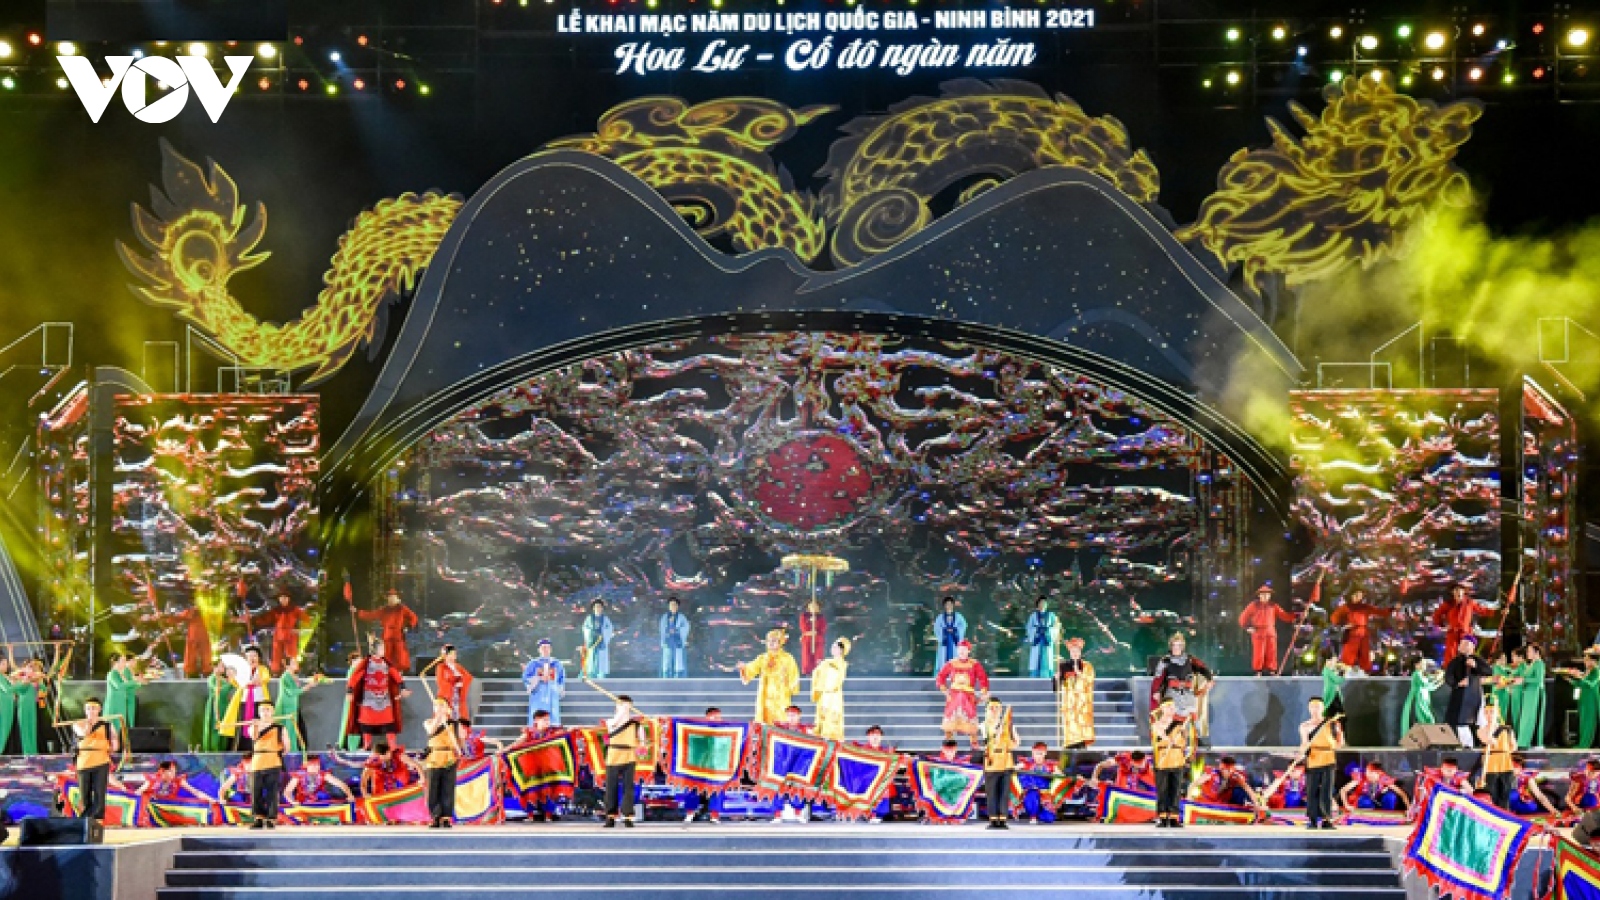 2021 National Tourism Year launched in Ninh Binh 